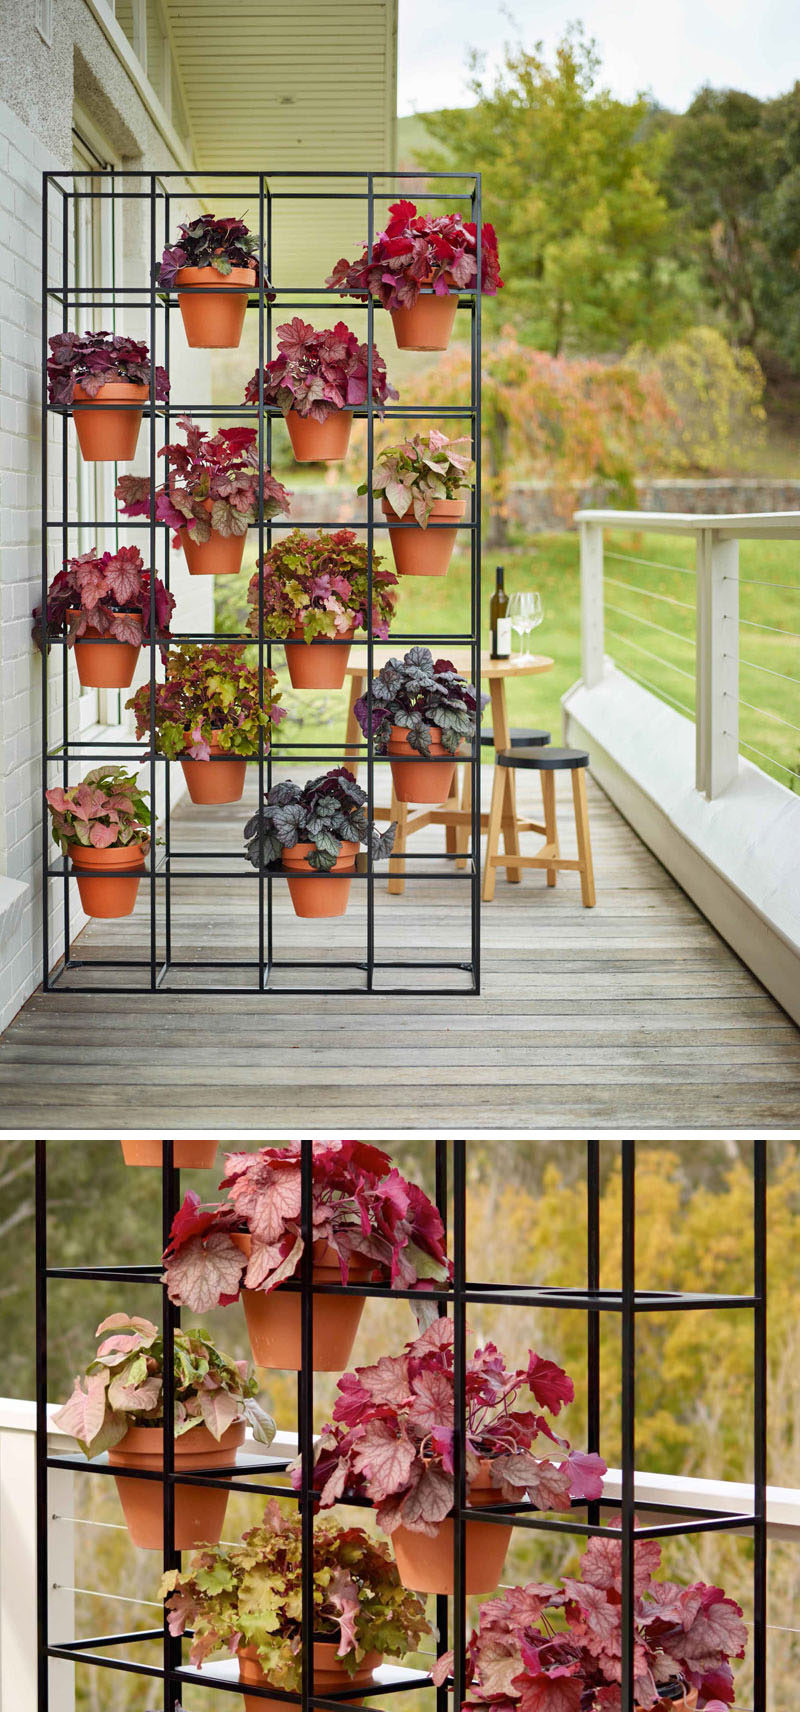 vertical garden contemporist create separation grid easy way newsletter daily sign email